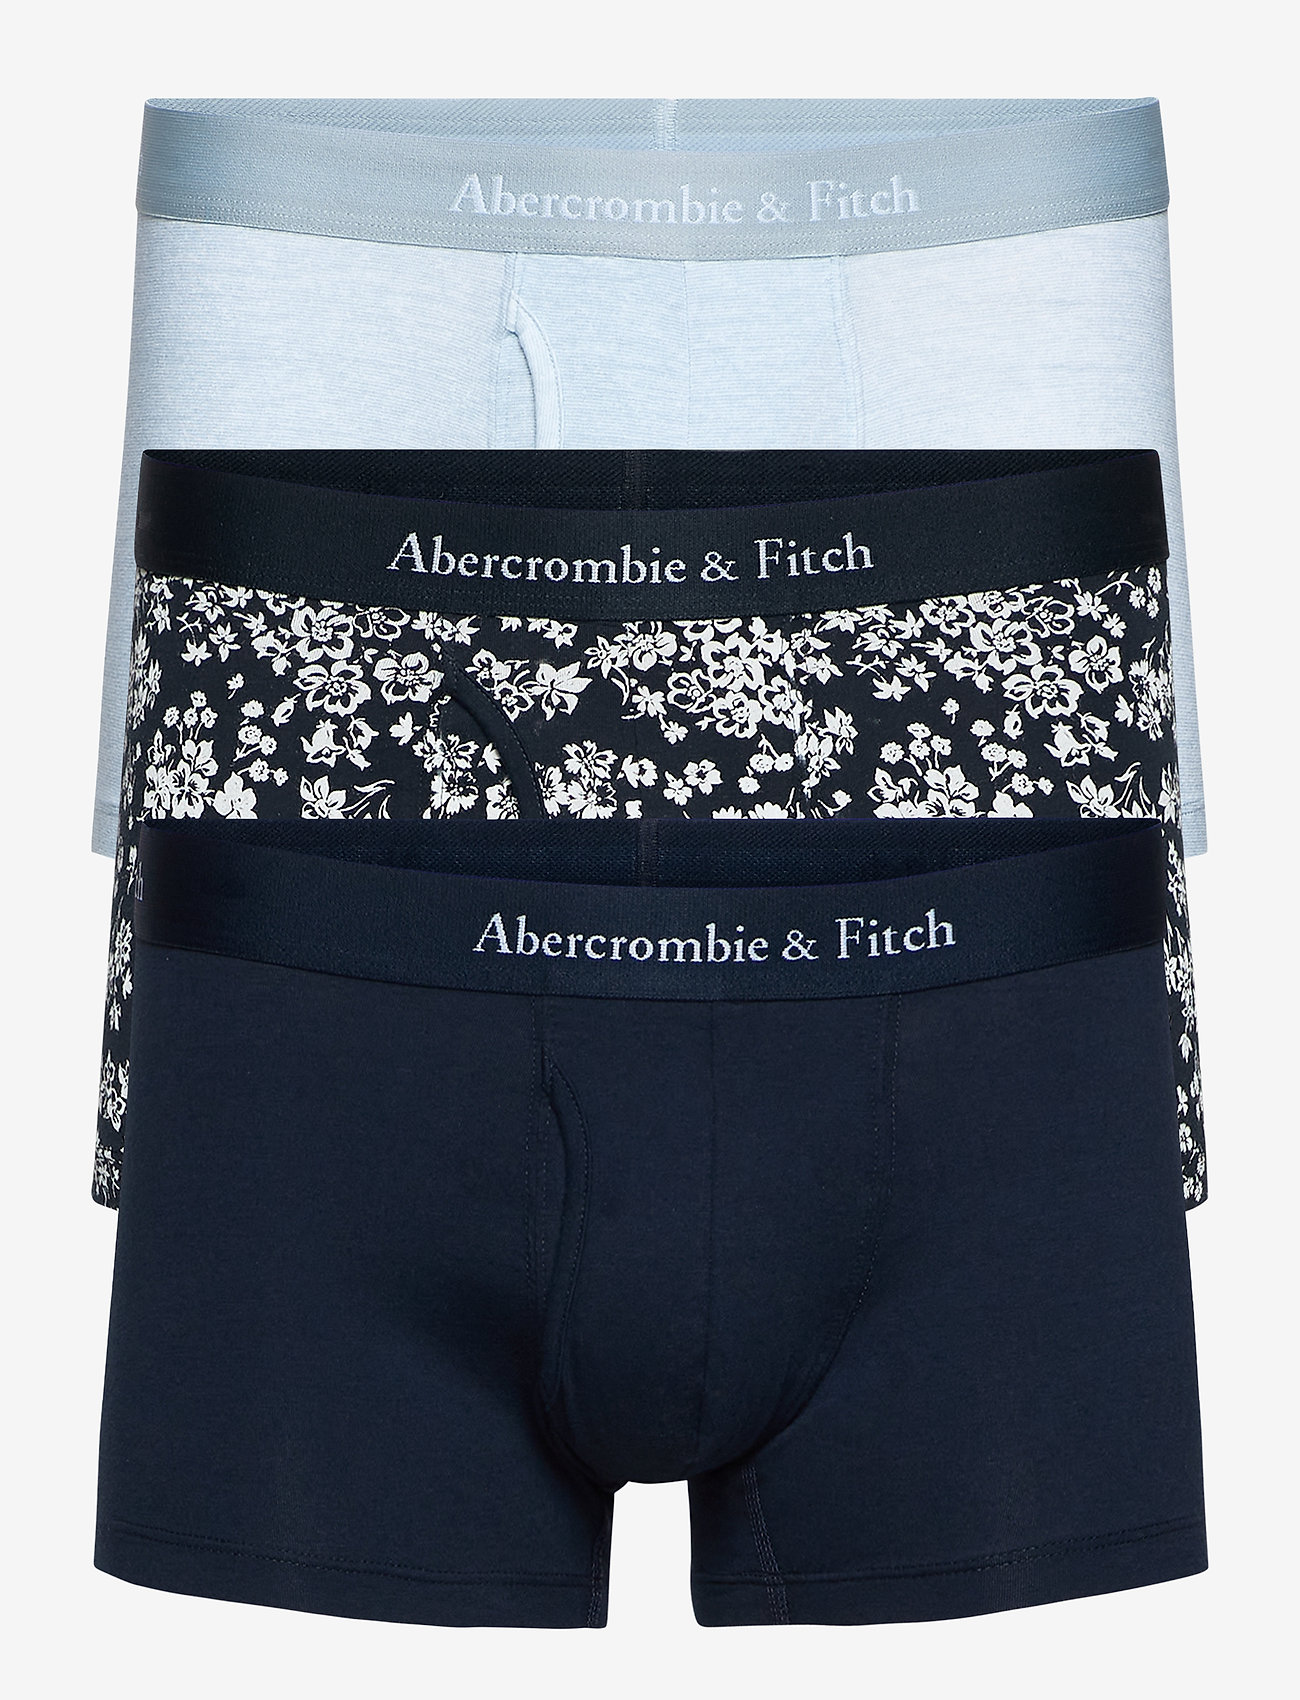 abercrombie & fitch boxers